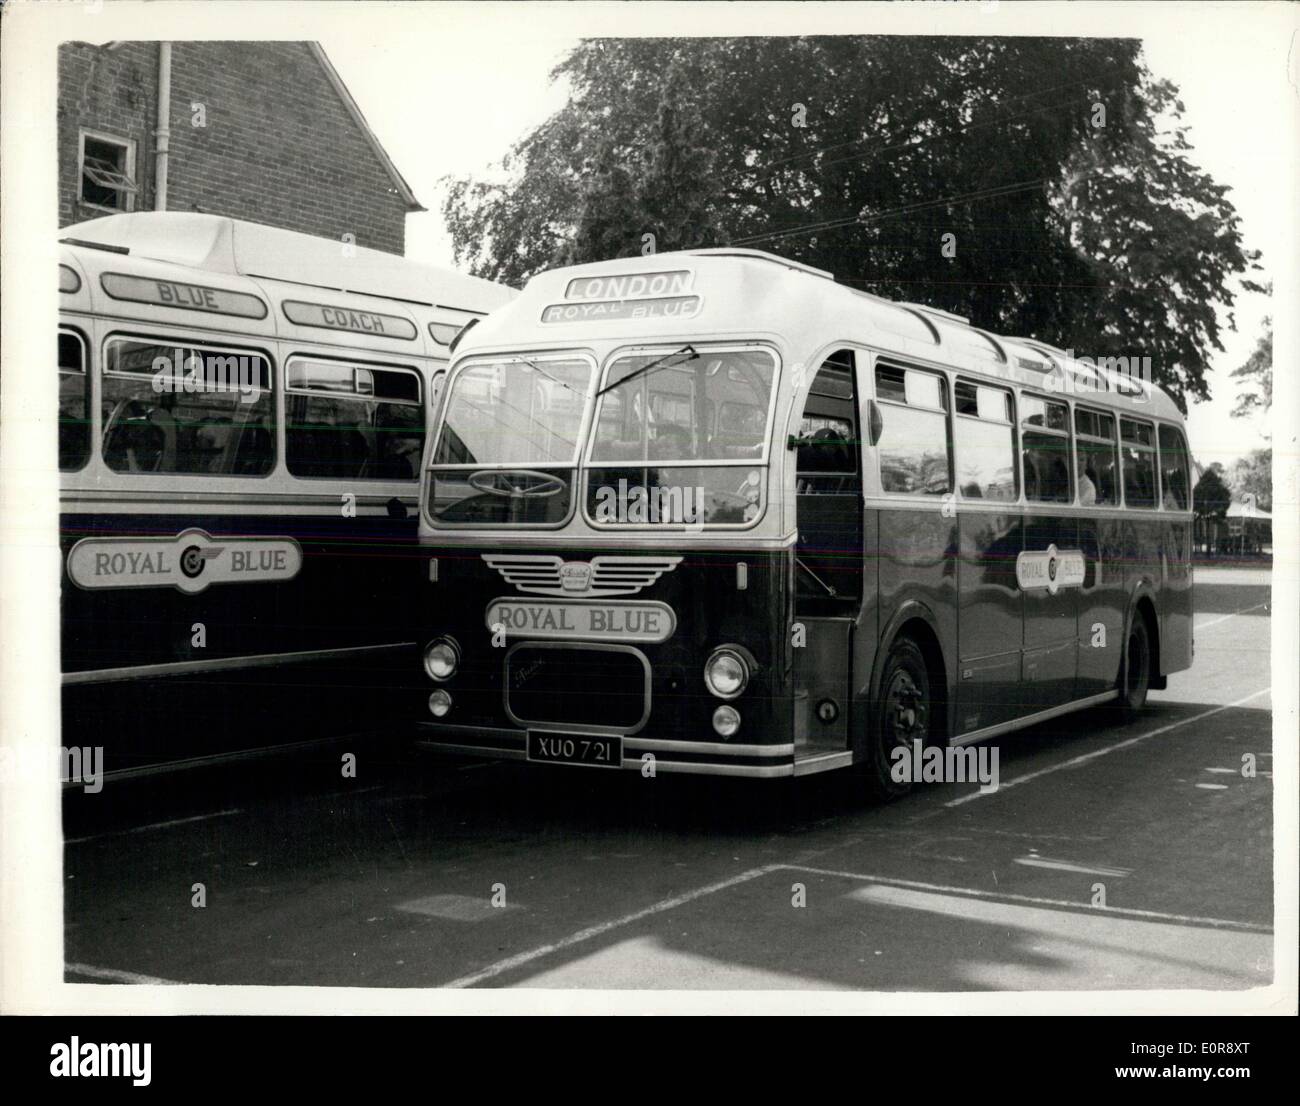 Jul. 10, 1958 - The Hunt for Frank Mitchell ends. Caught on Bournemouth to London Coach: Frank Mitchell, the dangerous maniac who escaped from Broadmoor, was caught yesterday in a Bournemouth to London coach at Hartley Wintney, Hampshire. When police boarded the coach he made no resistance, He had been free for 36hours and had spent the night on Bournemouth beach, 60 miles away. There he was recognised and the police were warned. Photo shows View of the Royal Blue coach in which Mitchell was caught. Stock Photo